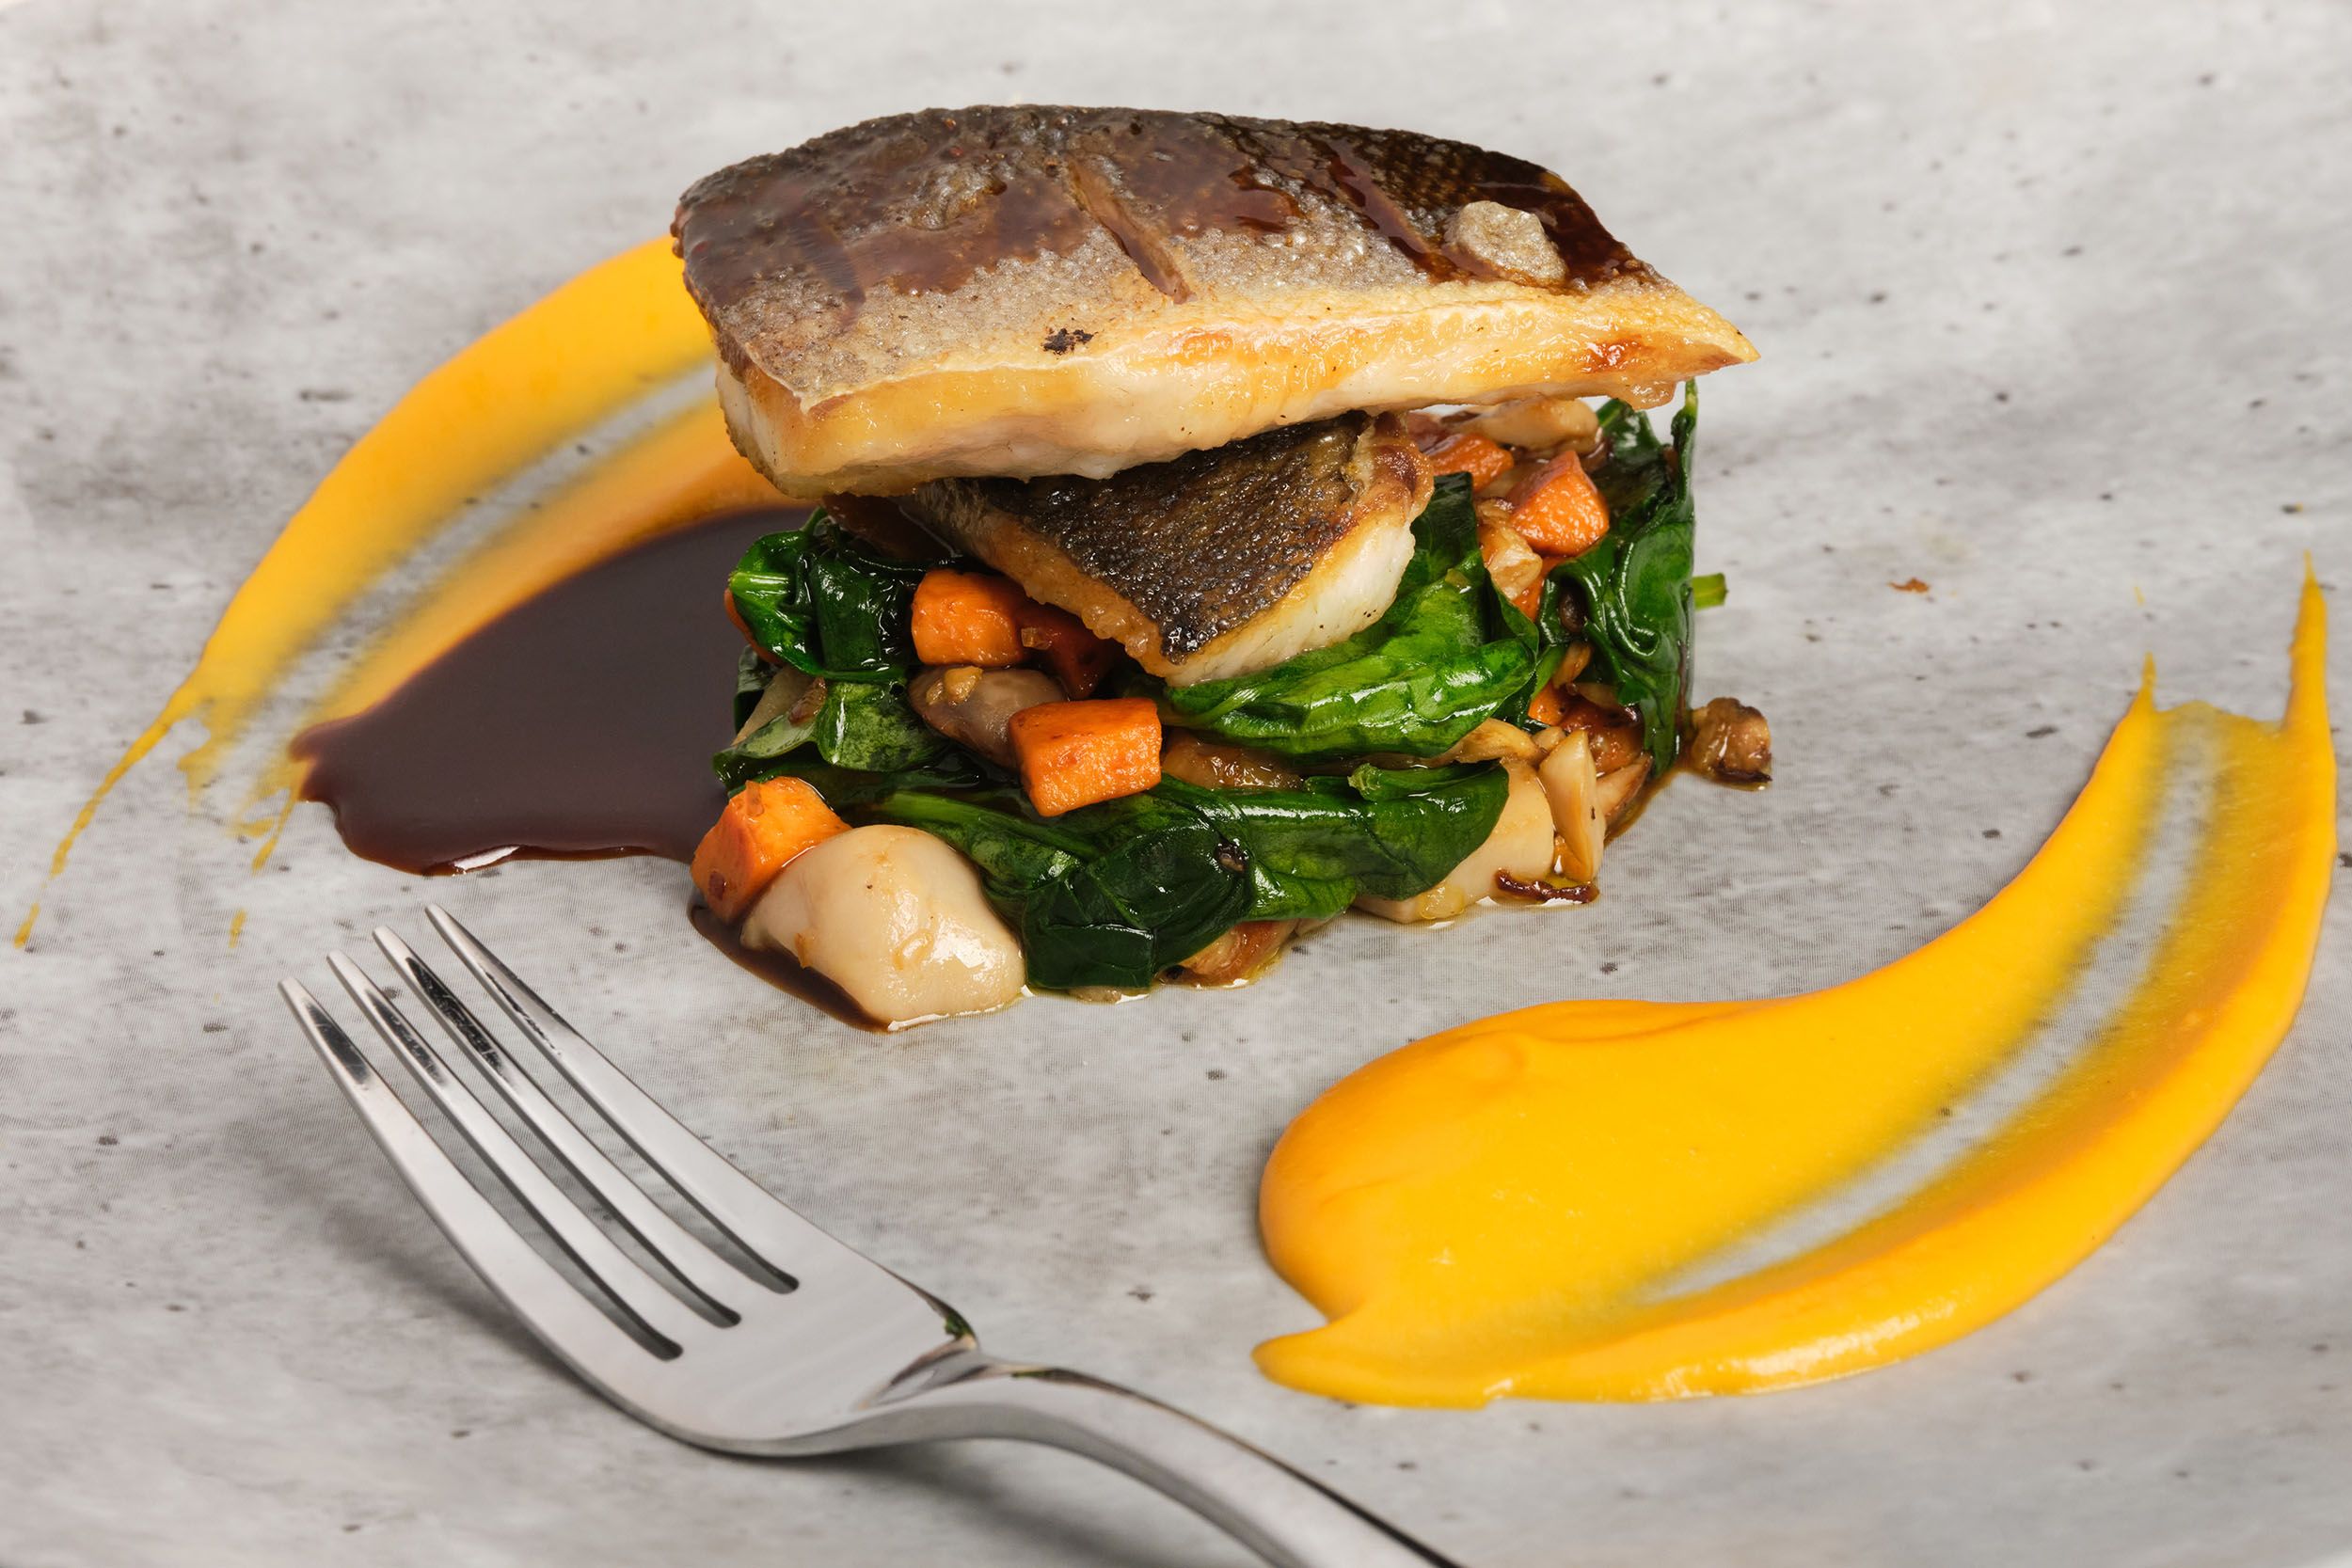 Gourmet white fish served with vegetables and sauce on grey plate